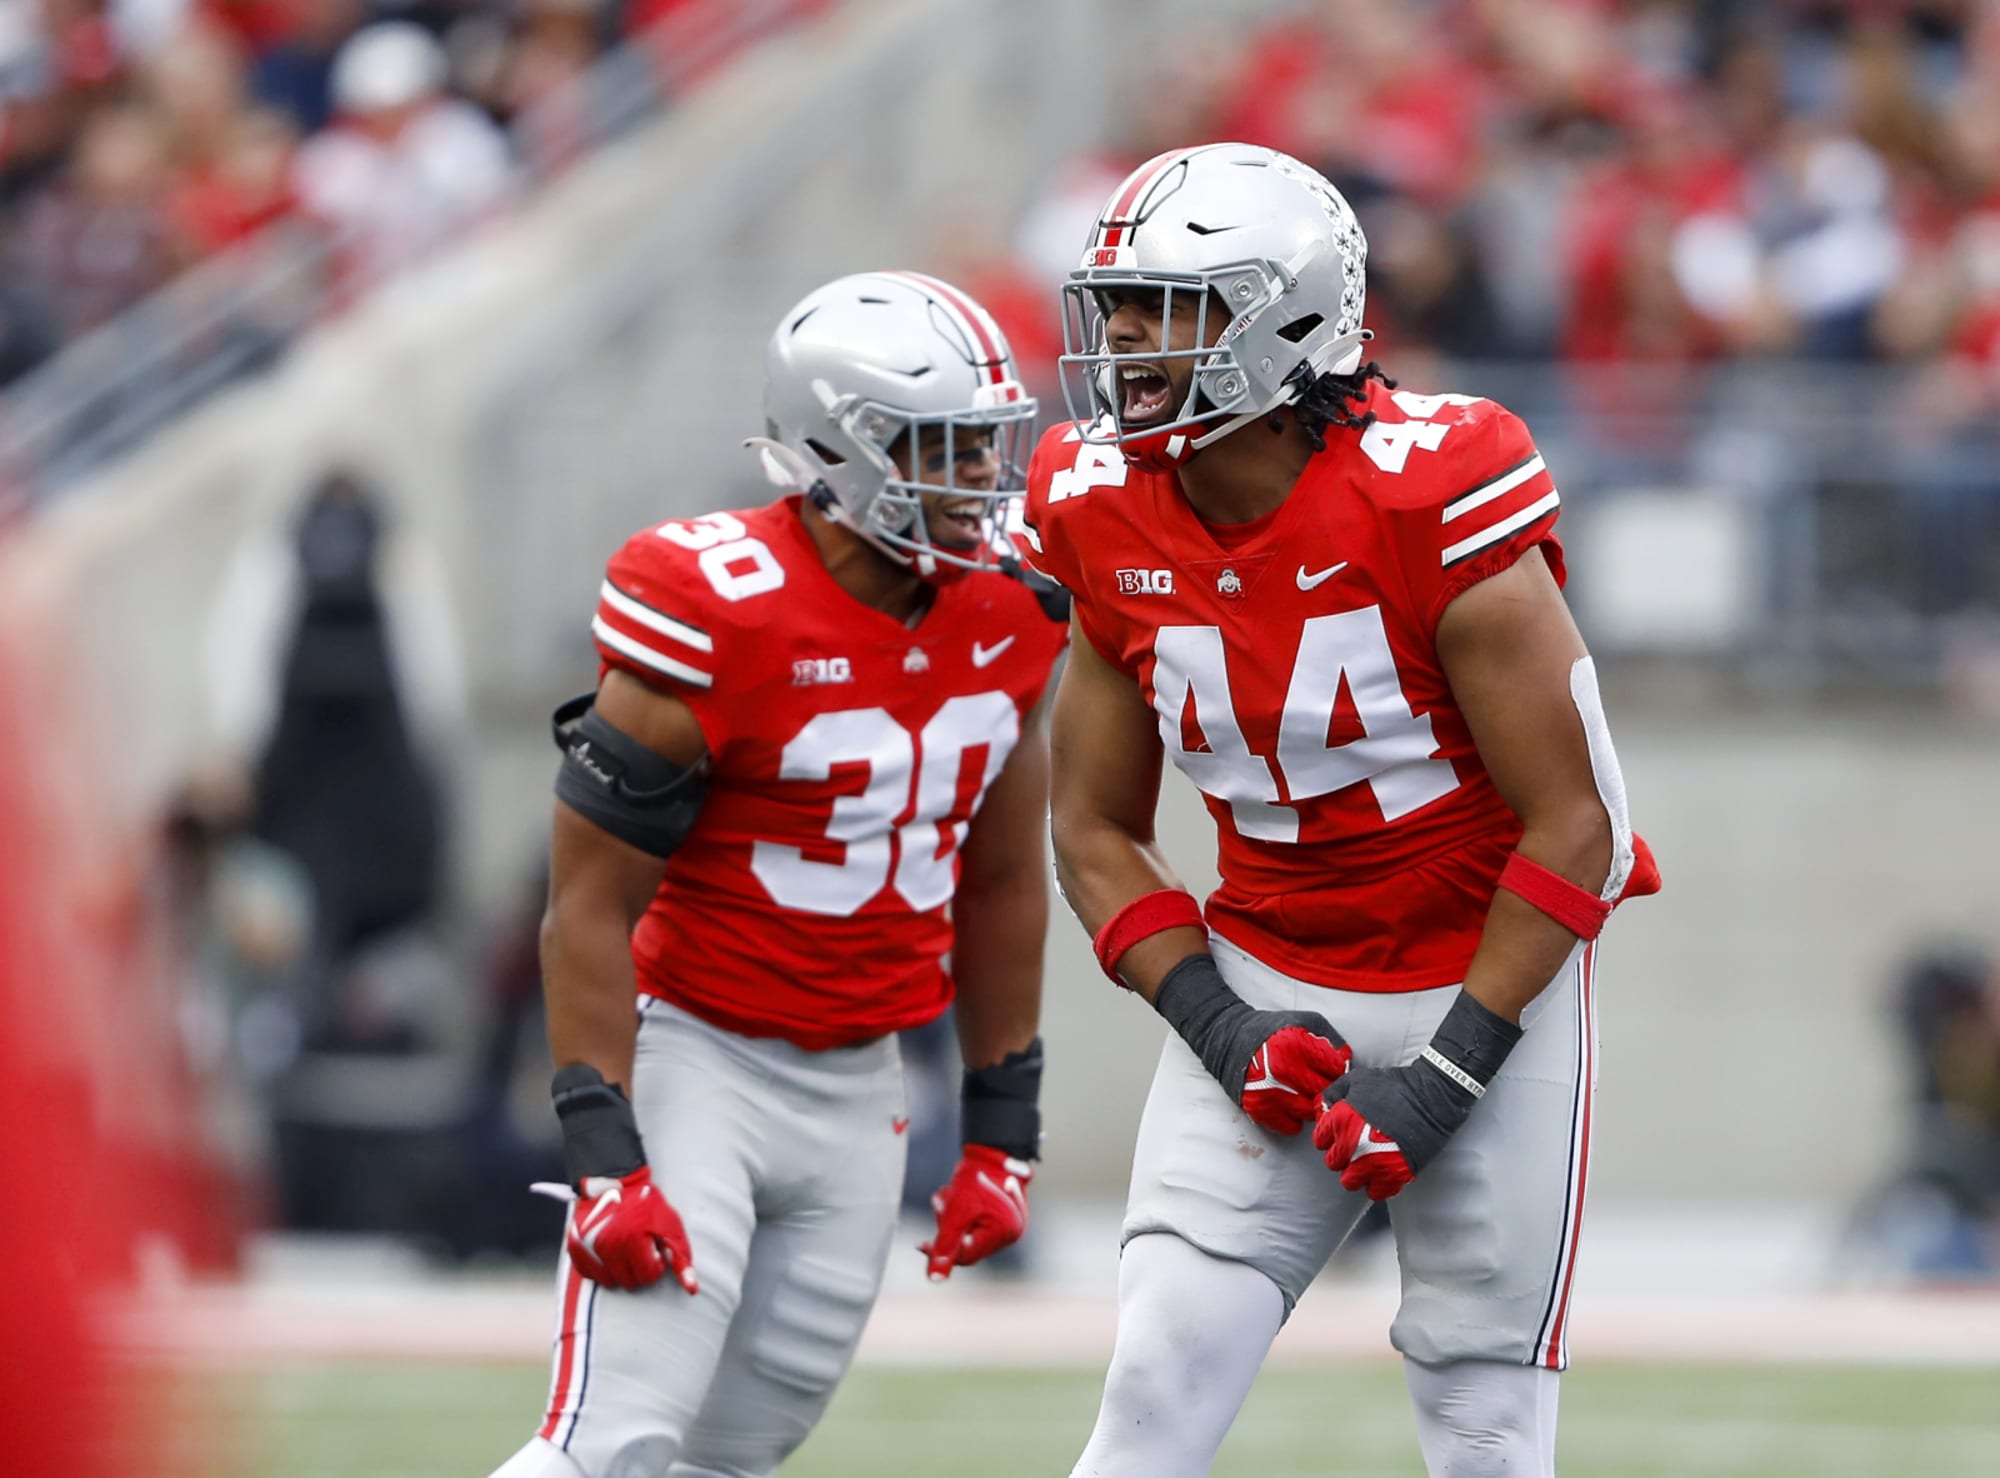 Ohio State football vs. Michigan State How to watch